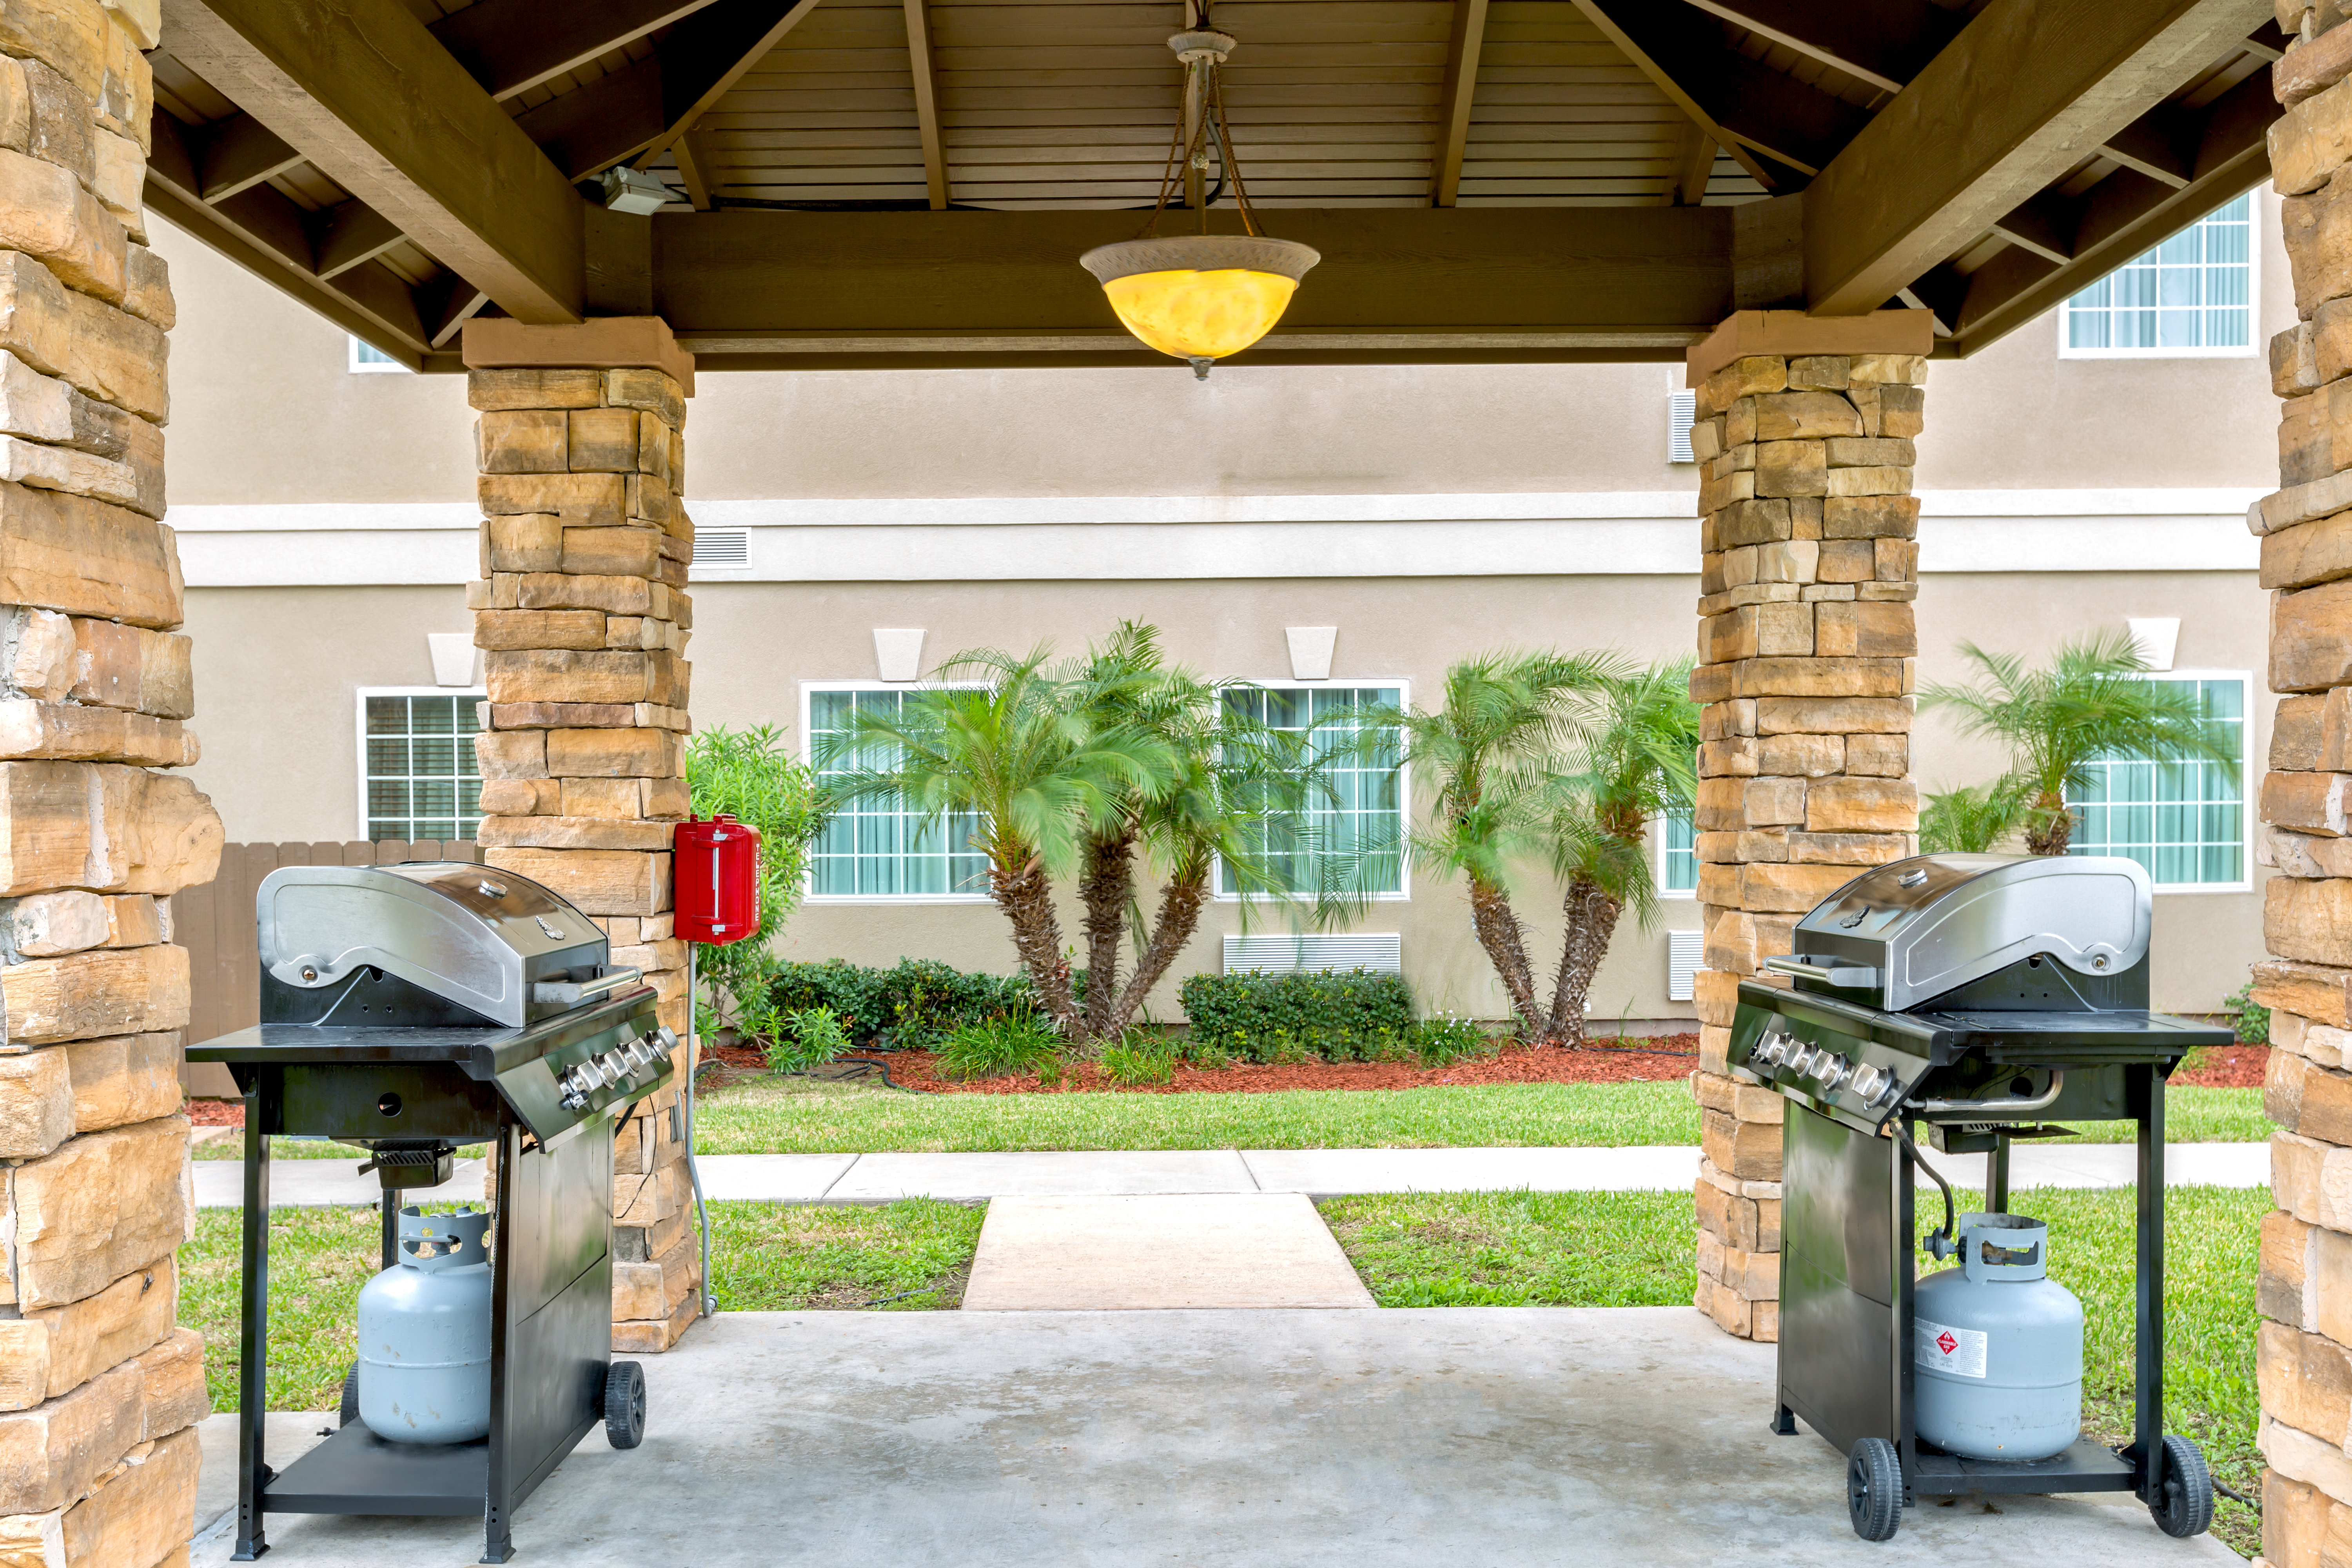 Grill your dinner at on our complimentary gas grills.